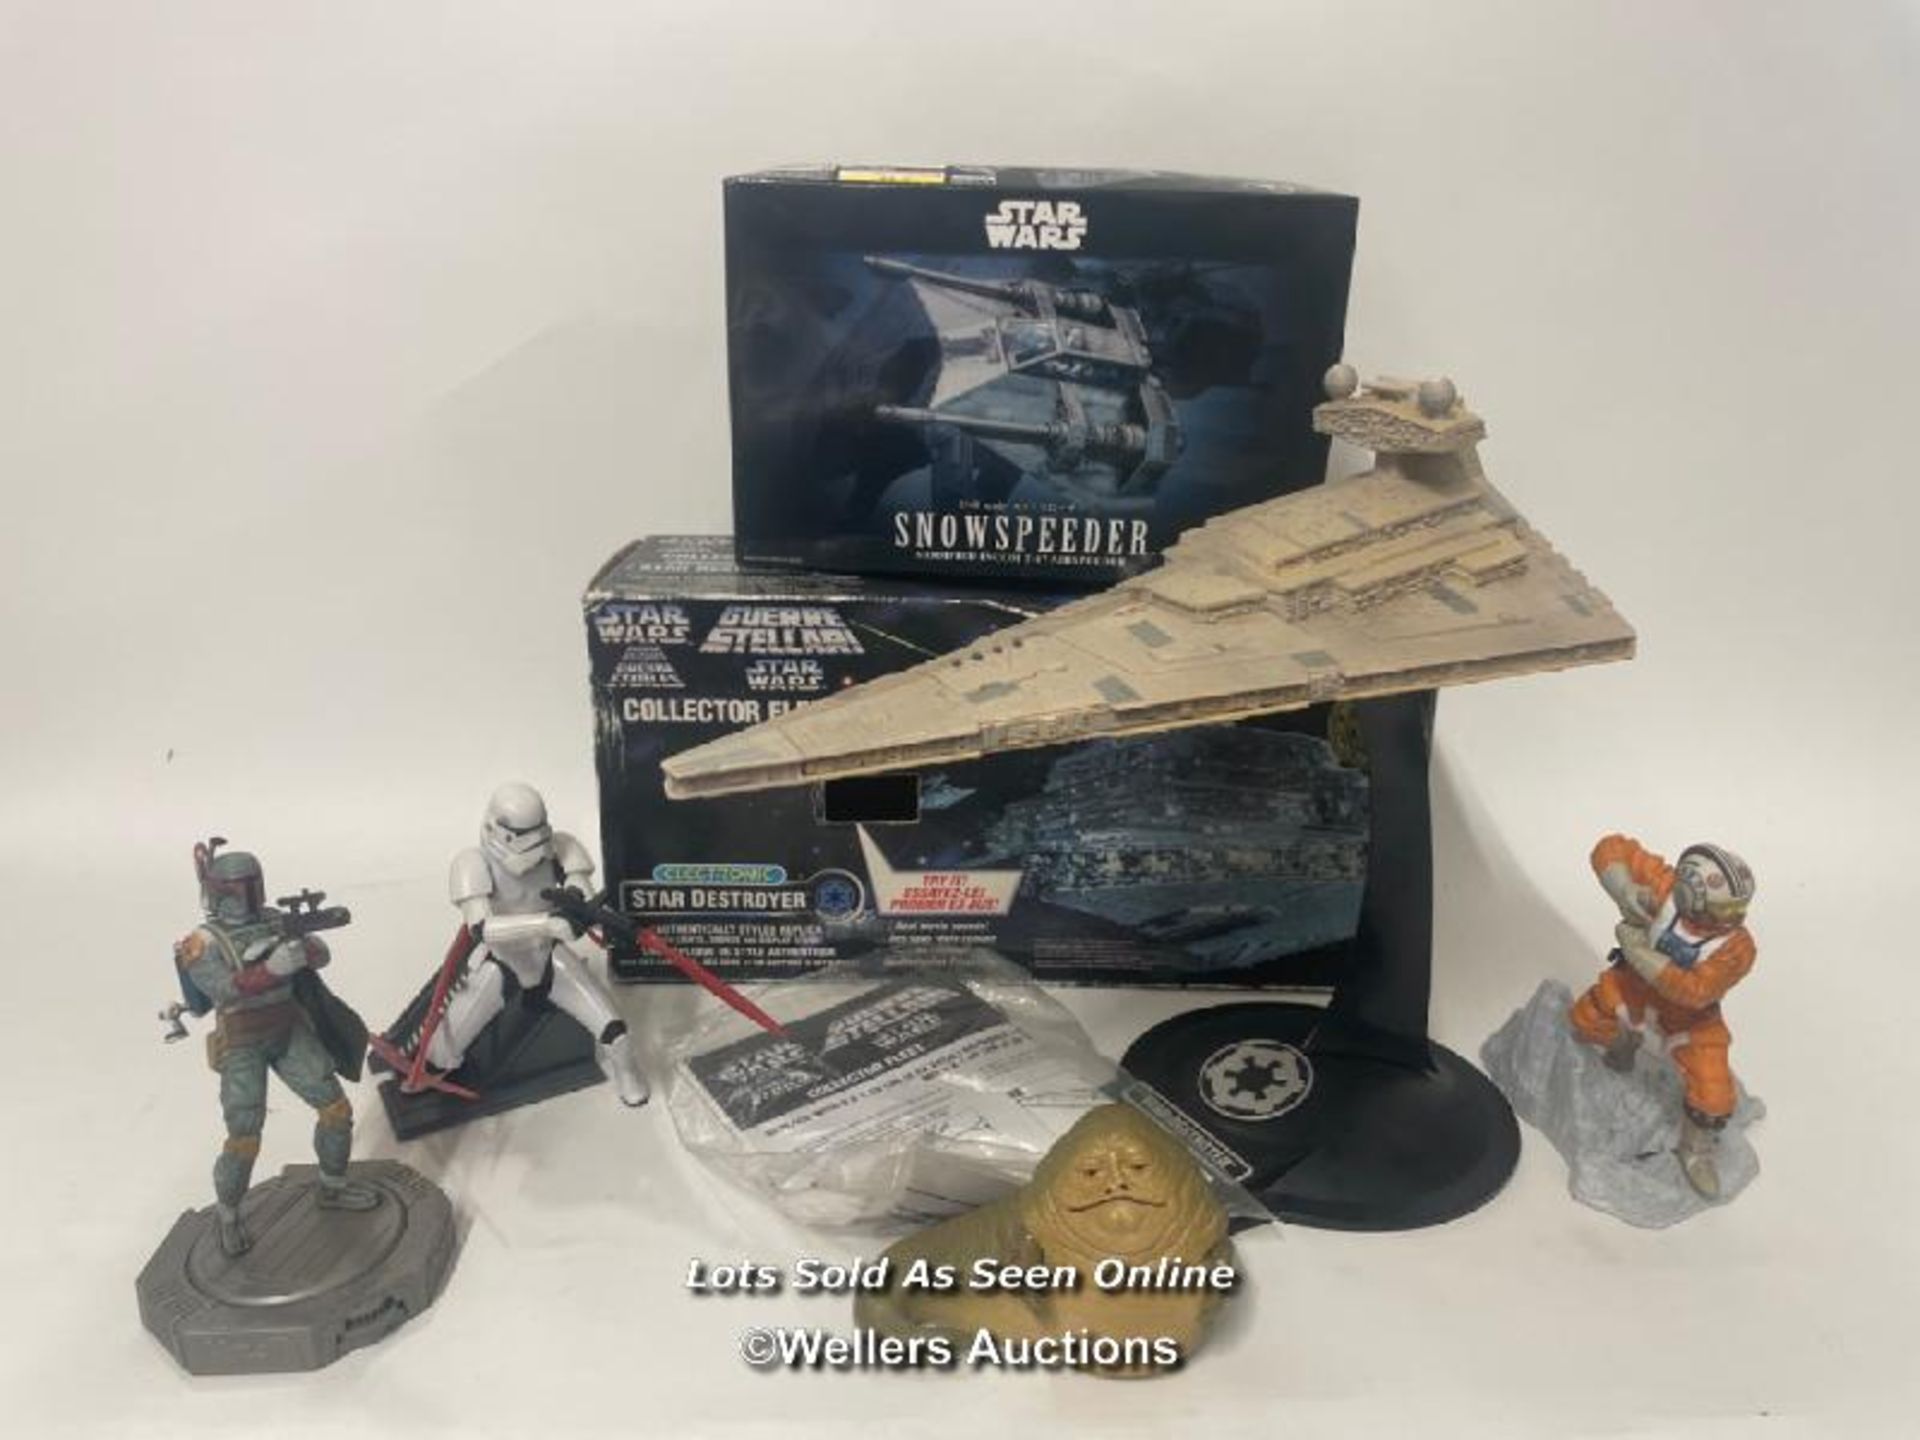 Kenner Electronic Star Destroyer toy 1997, Ban Dai Snowspeeder 1/48 scale model (new) and four